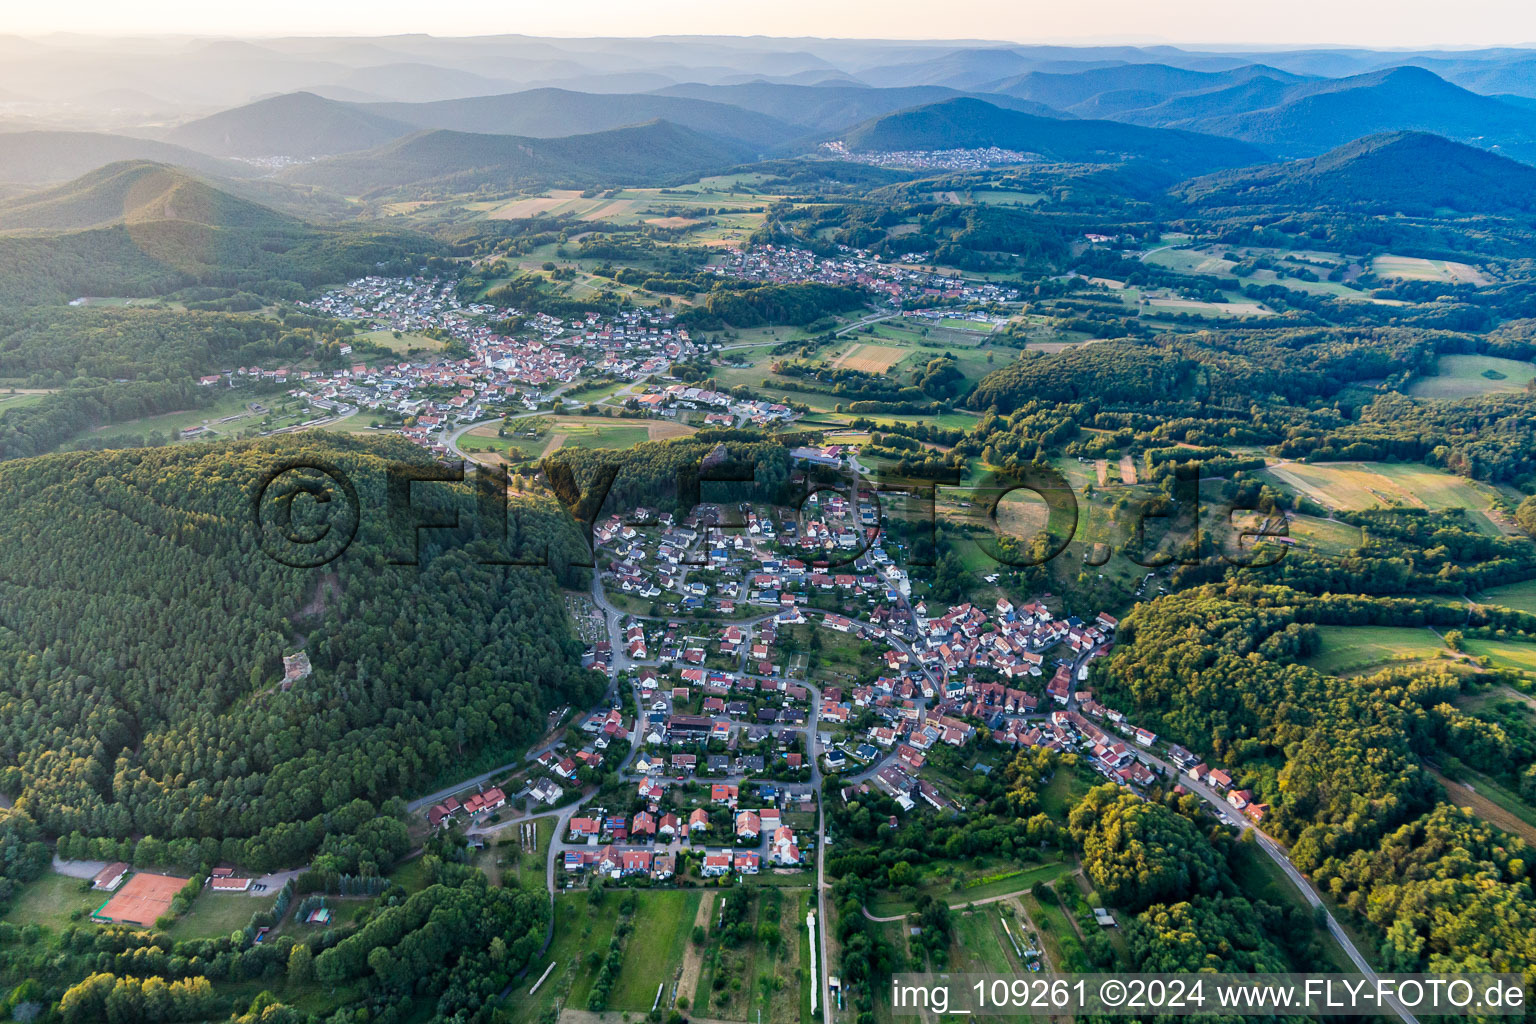 Aerial view of District Stein in Gossersweiler-Stein in the state Rhineland-Palatinate, Germany